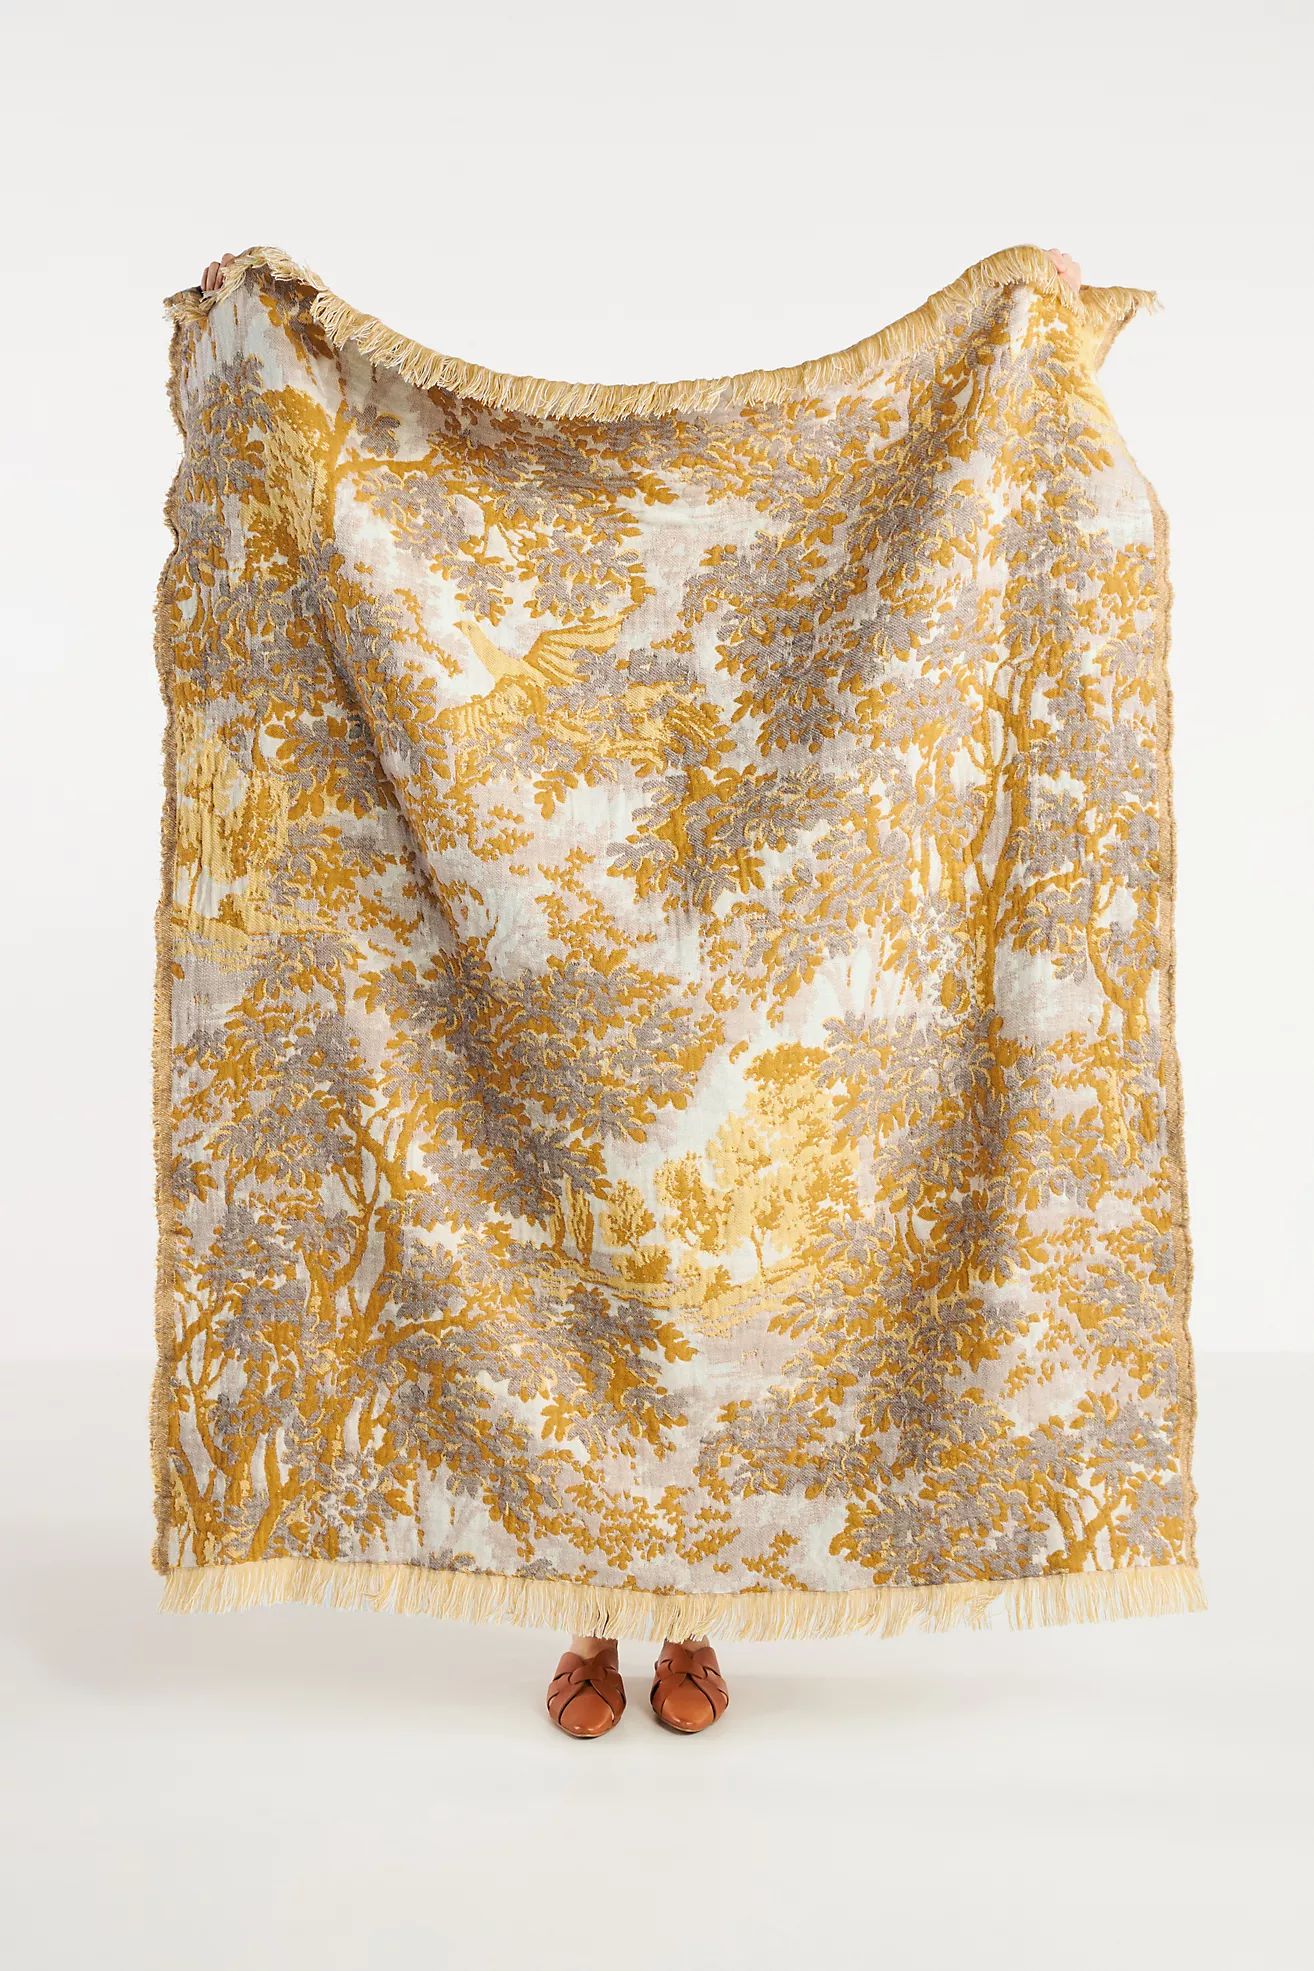 Vienne Jacquard Woven Fringed Throw | Anthropologie (US)